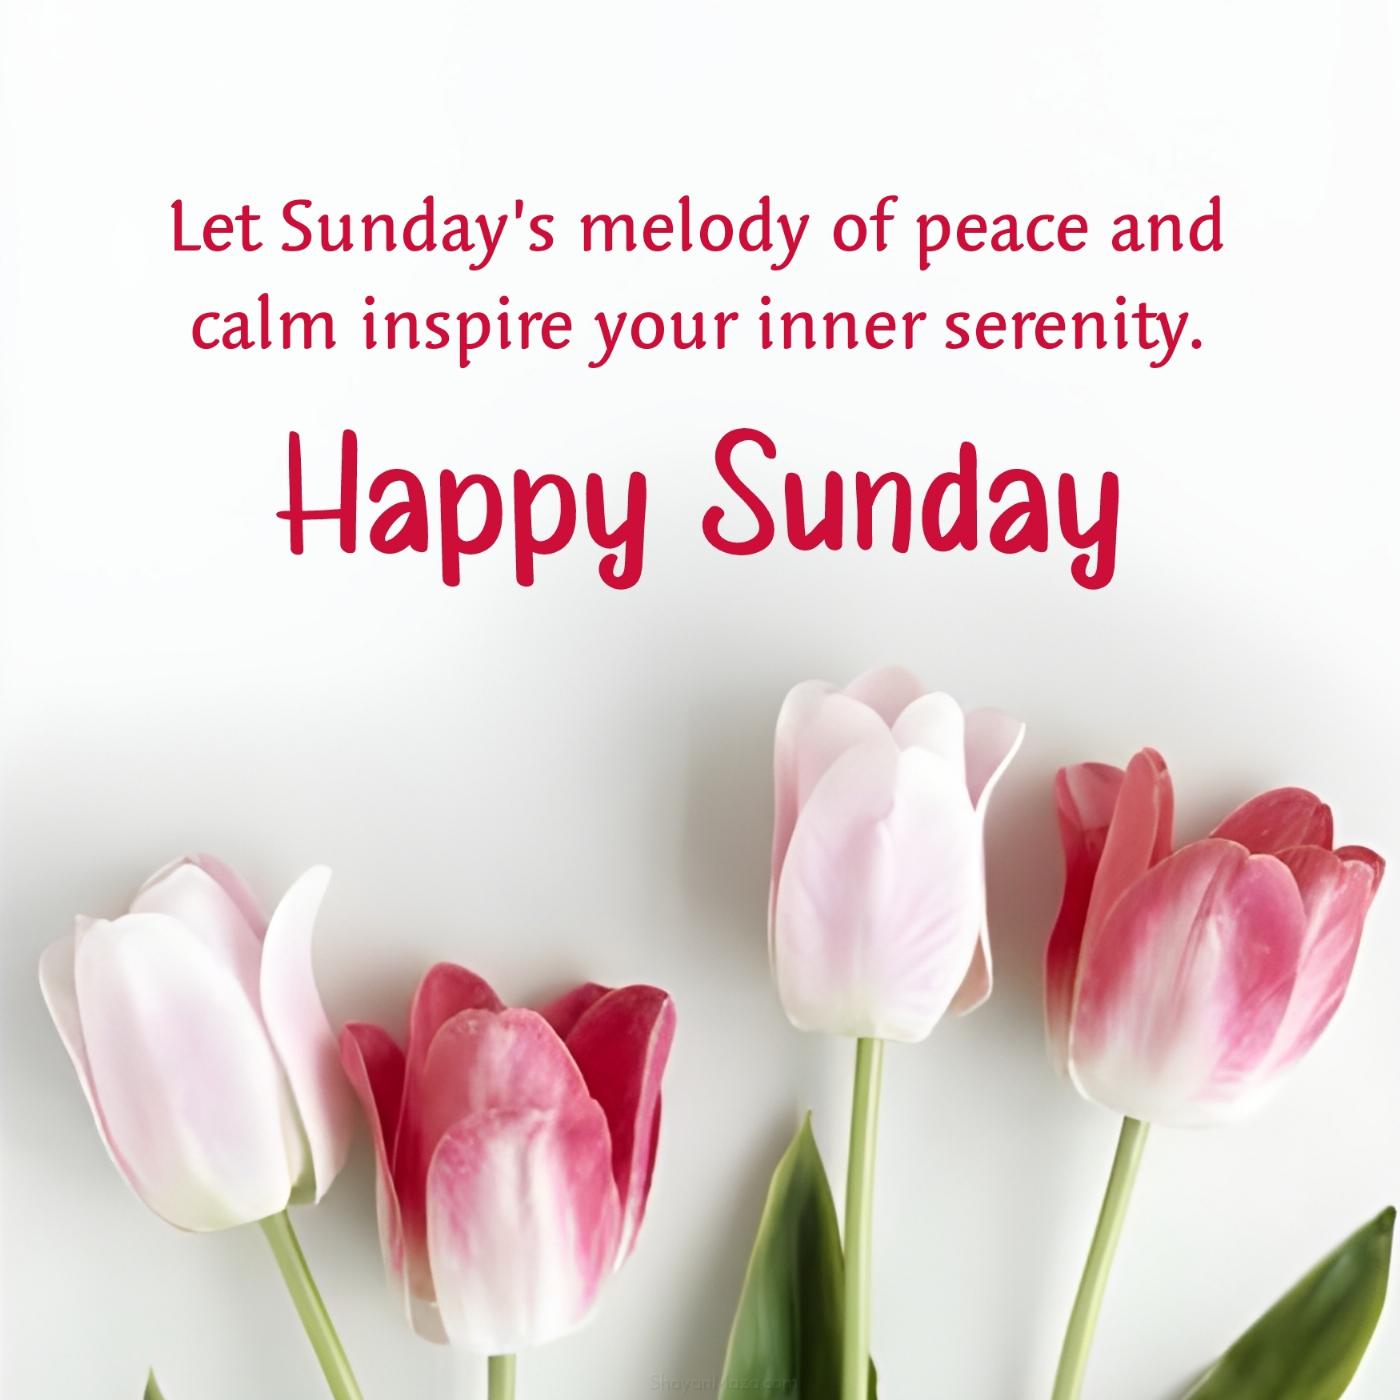 Let Sundays melody of peace and calm inspire your inner serenity